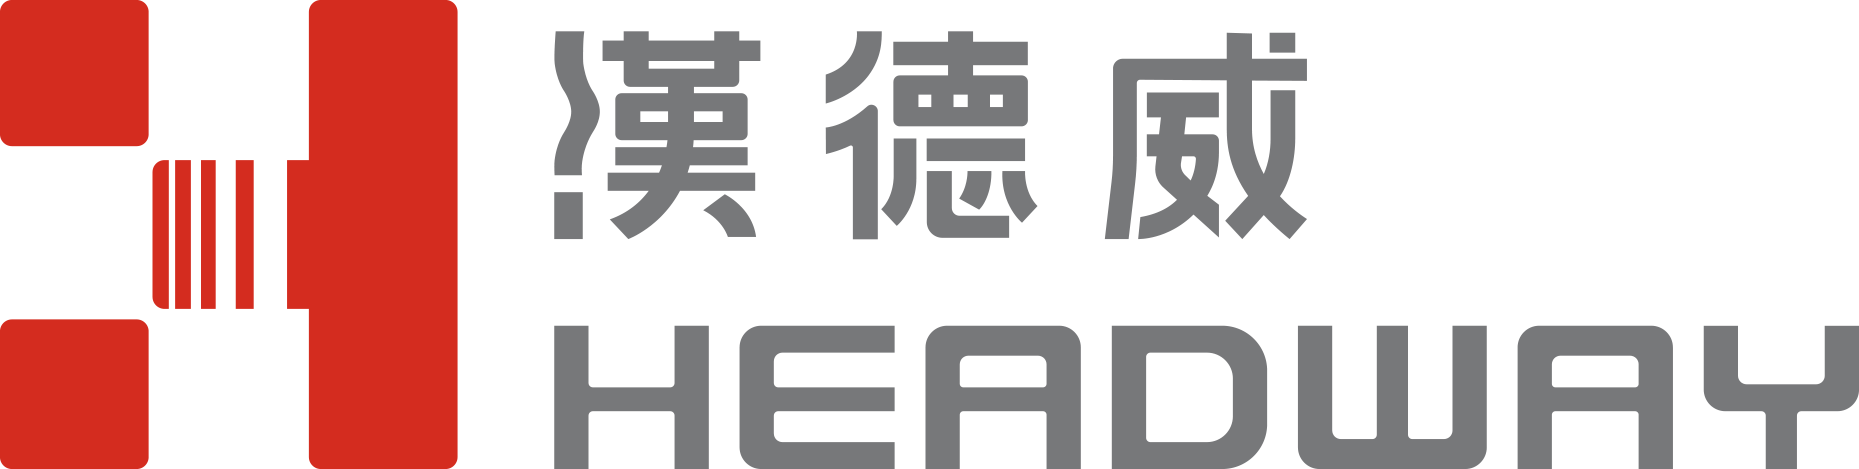 Headway Trading